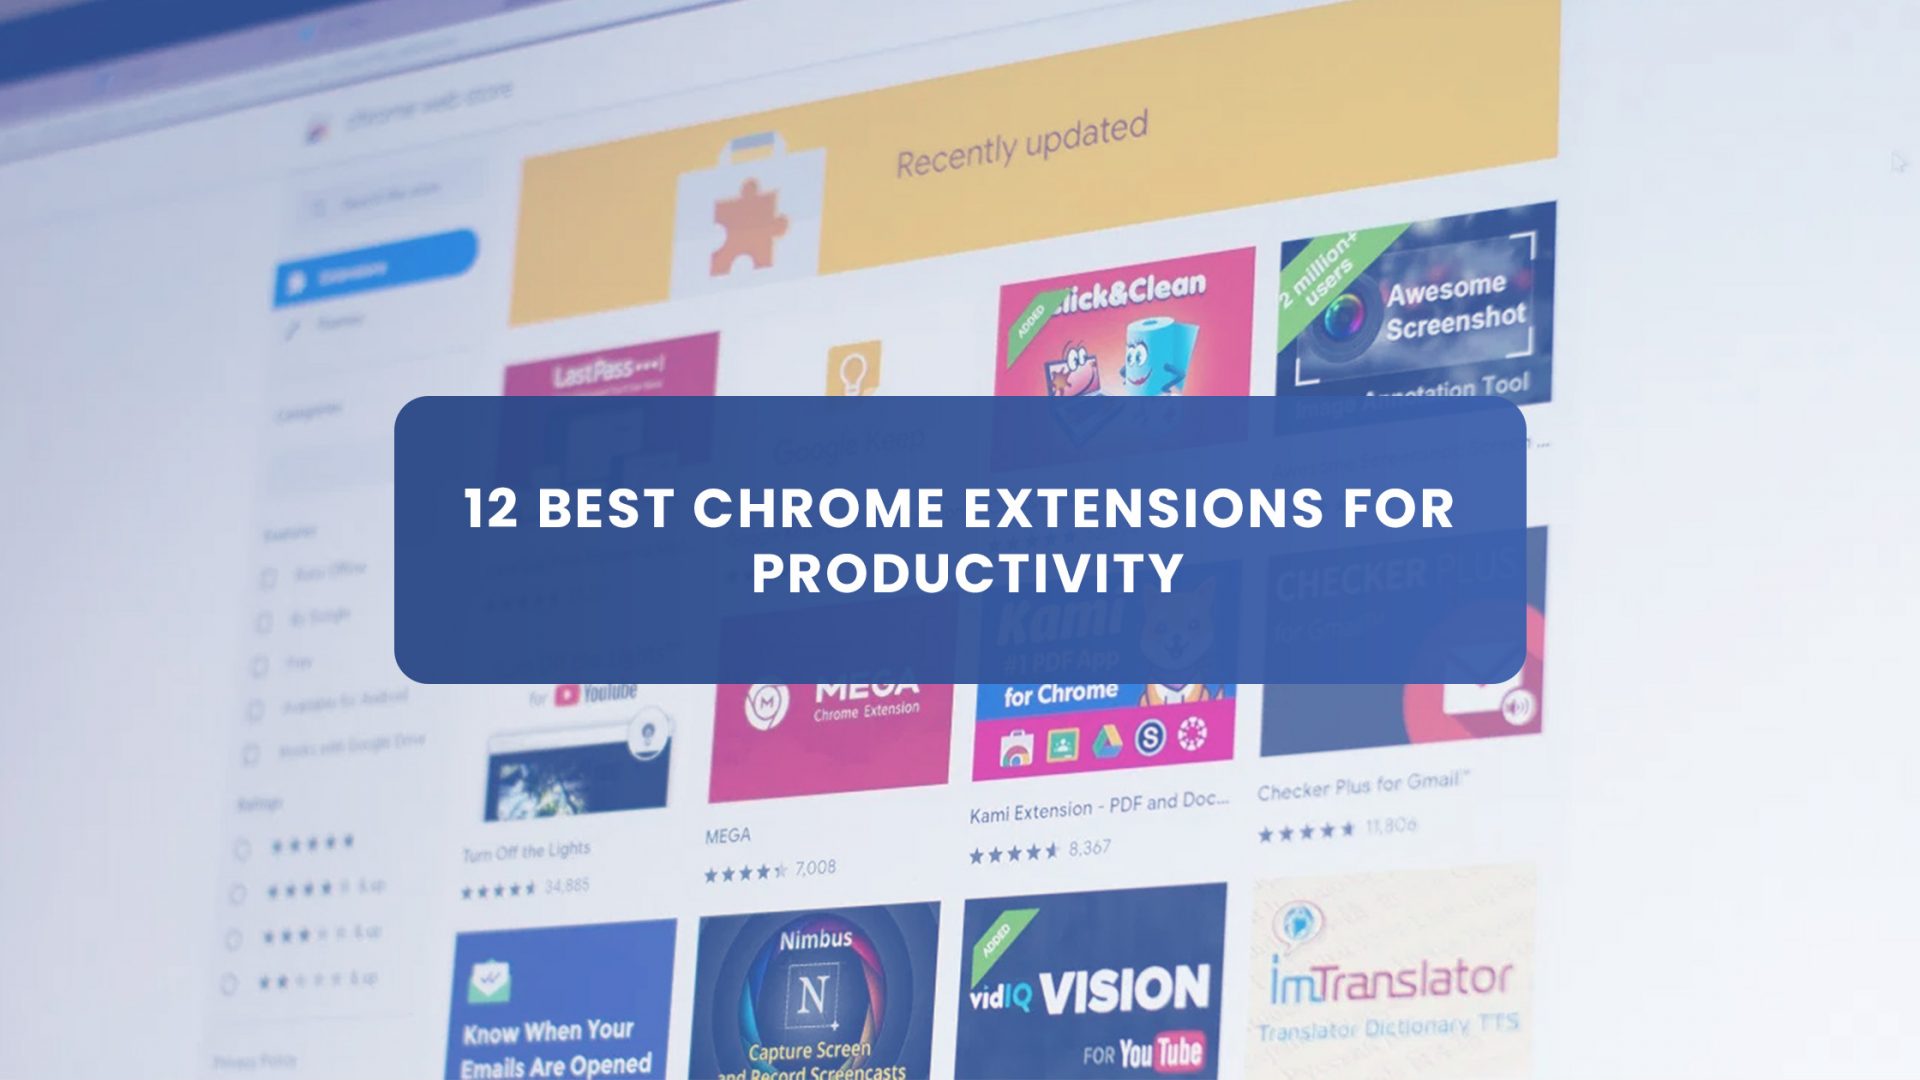 12 Best Chrome Extensions for Productivity